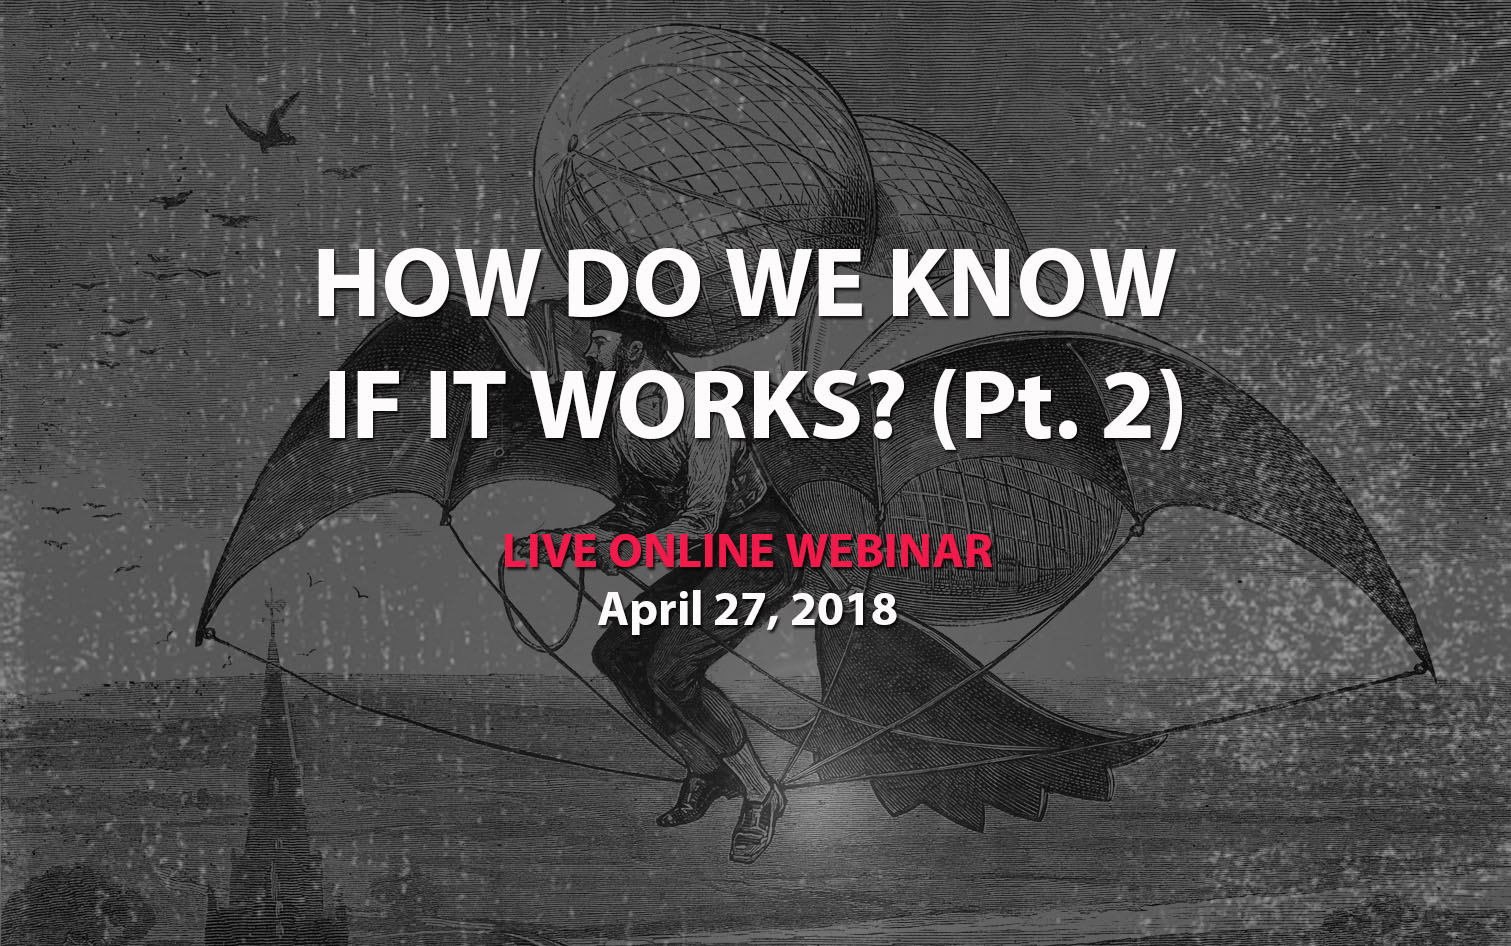 Webinar #25: How Do We Know If It Works Part 2